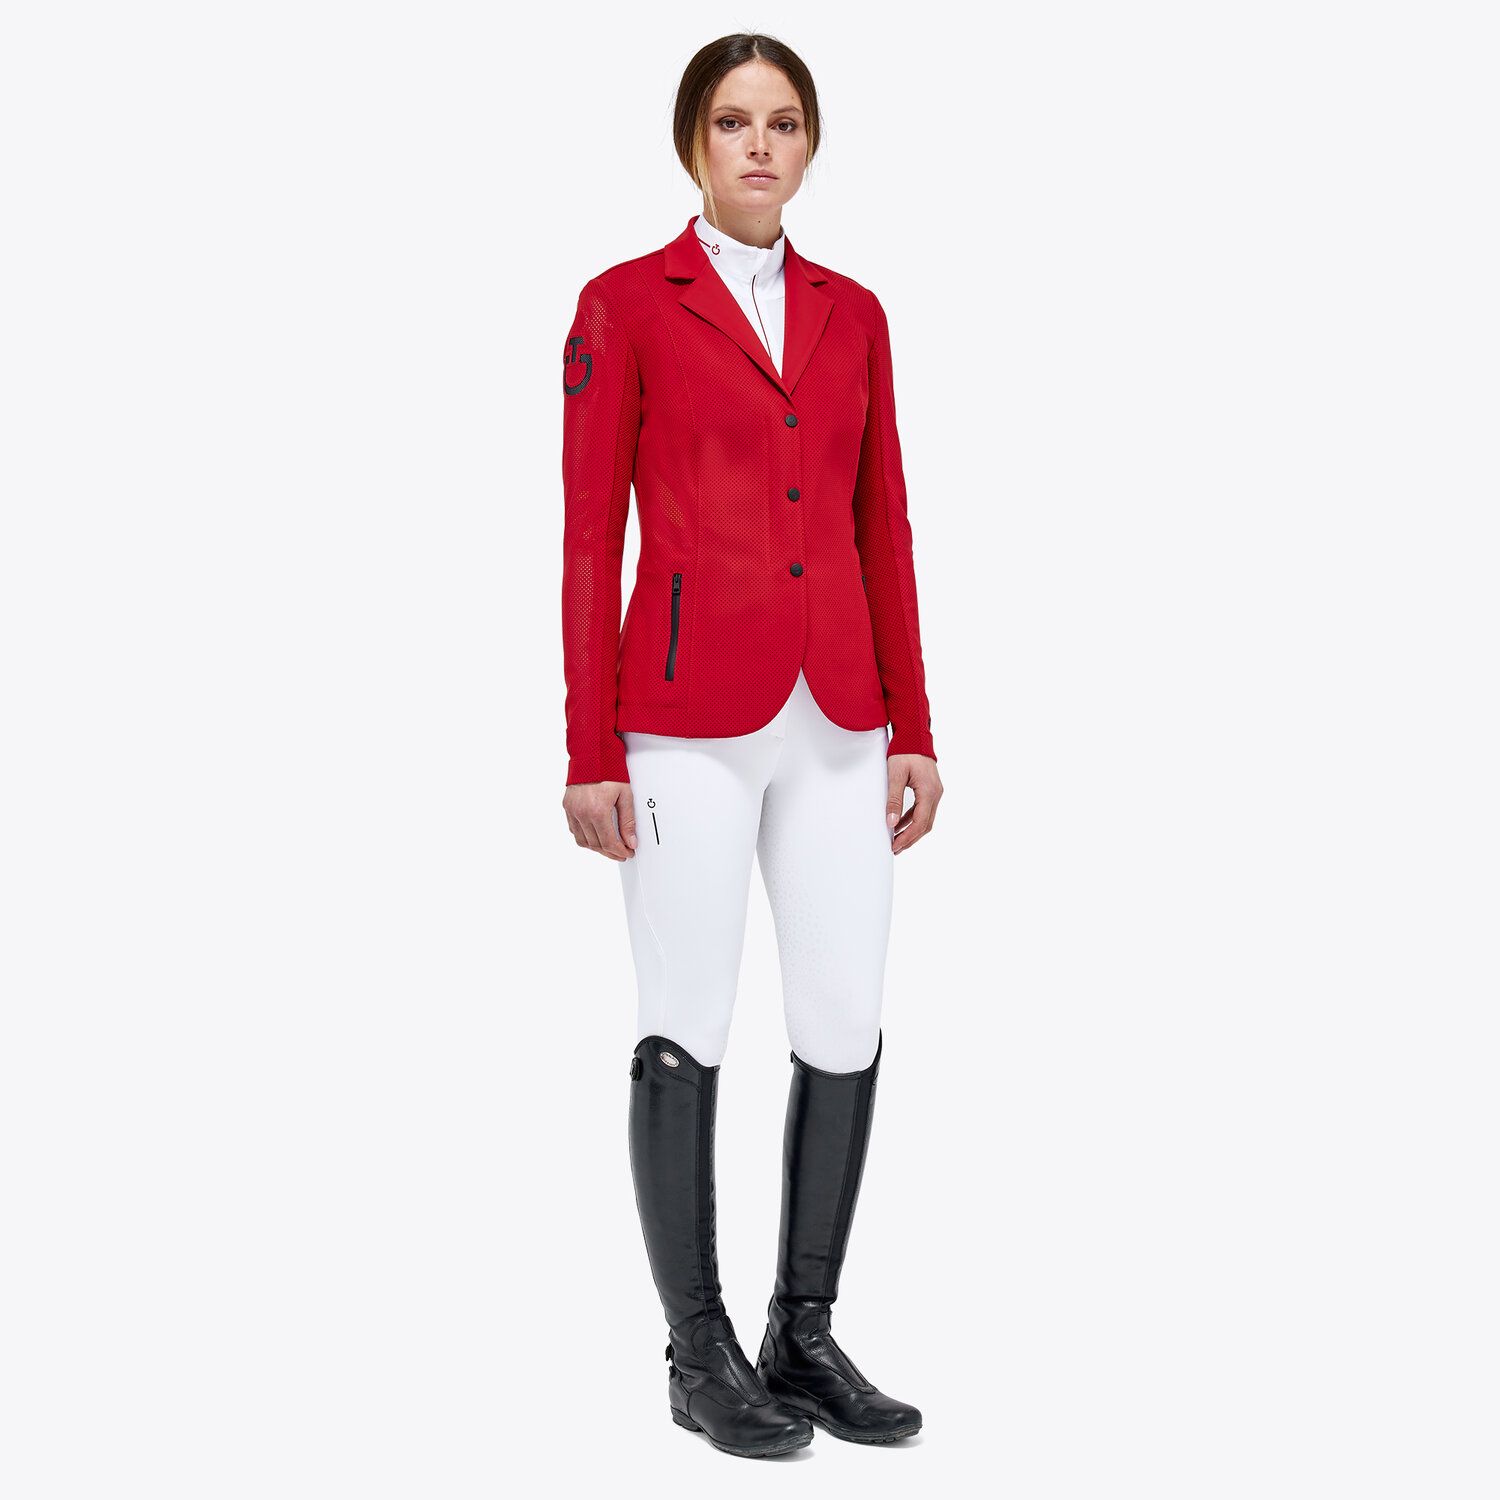 Cavalleria Toscana Women's competition riding jacket embroidery RED-2